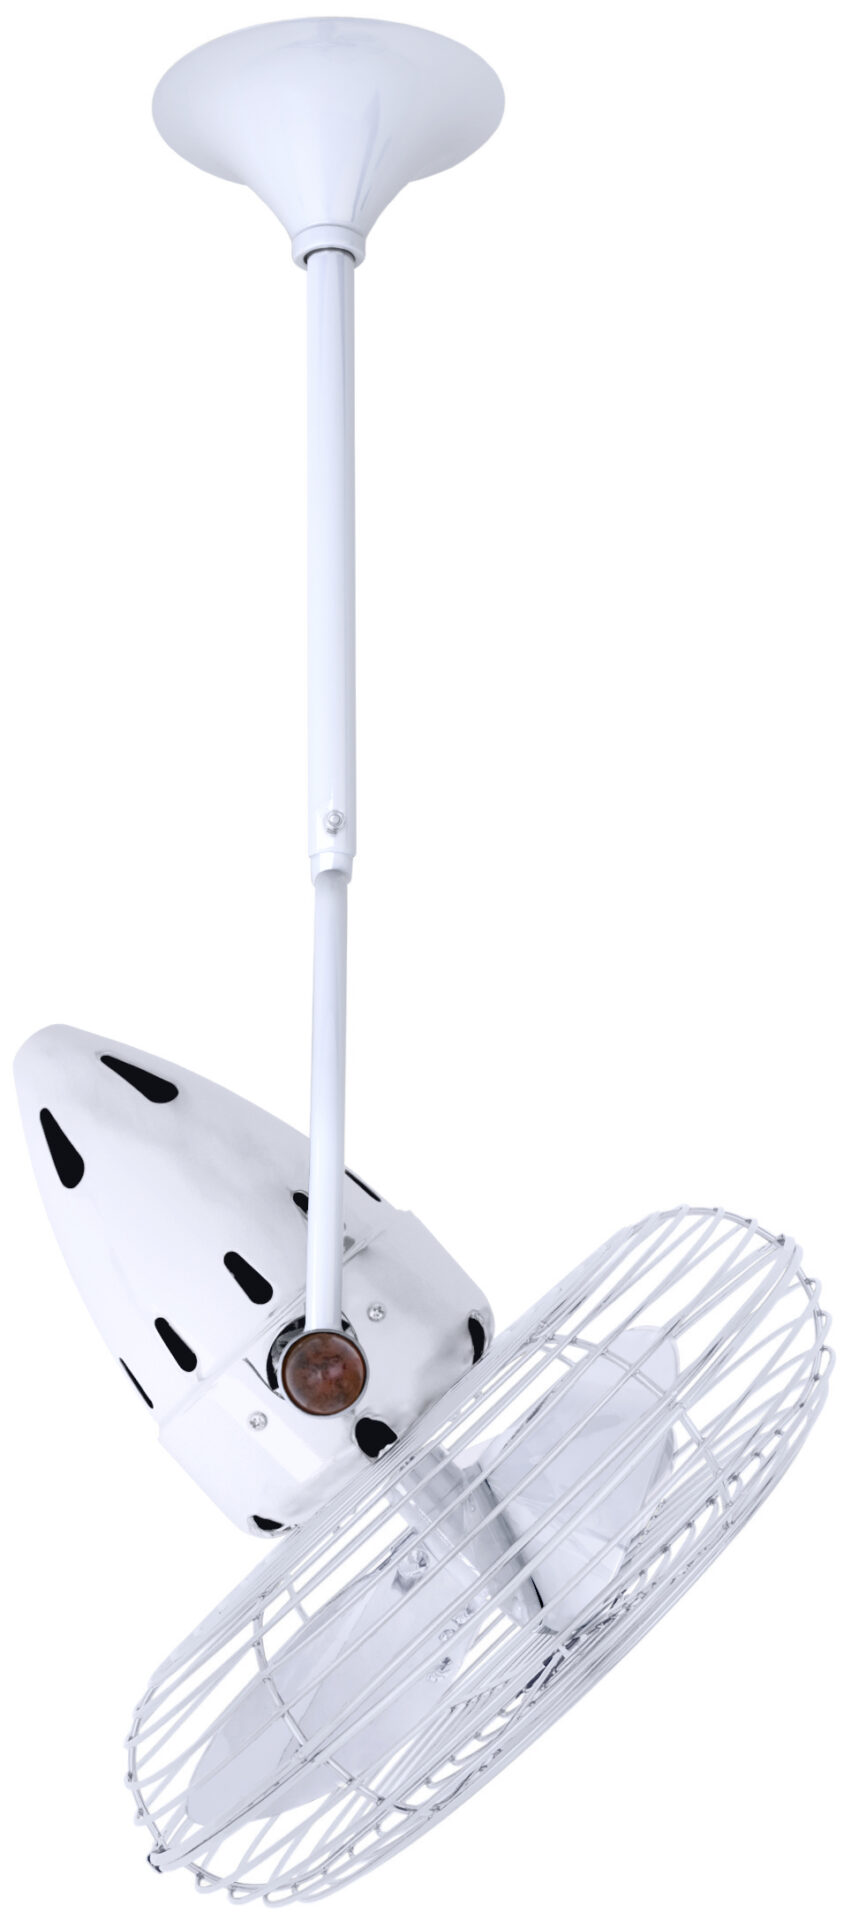 Jarold Direcional ceiling fan in gloss white finish with Metal blades in decorative guard made by Matthews Fan Company.